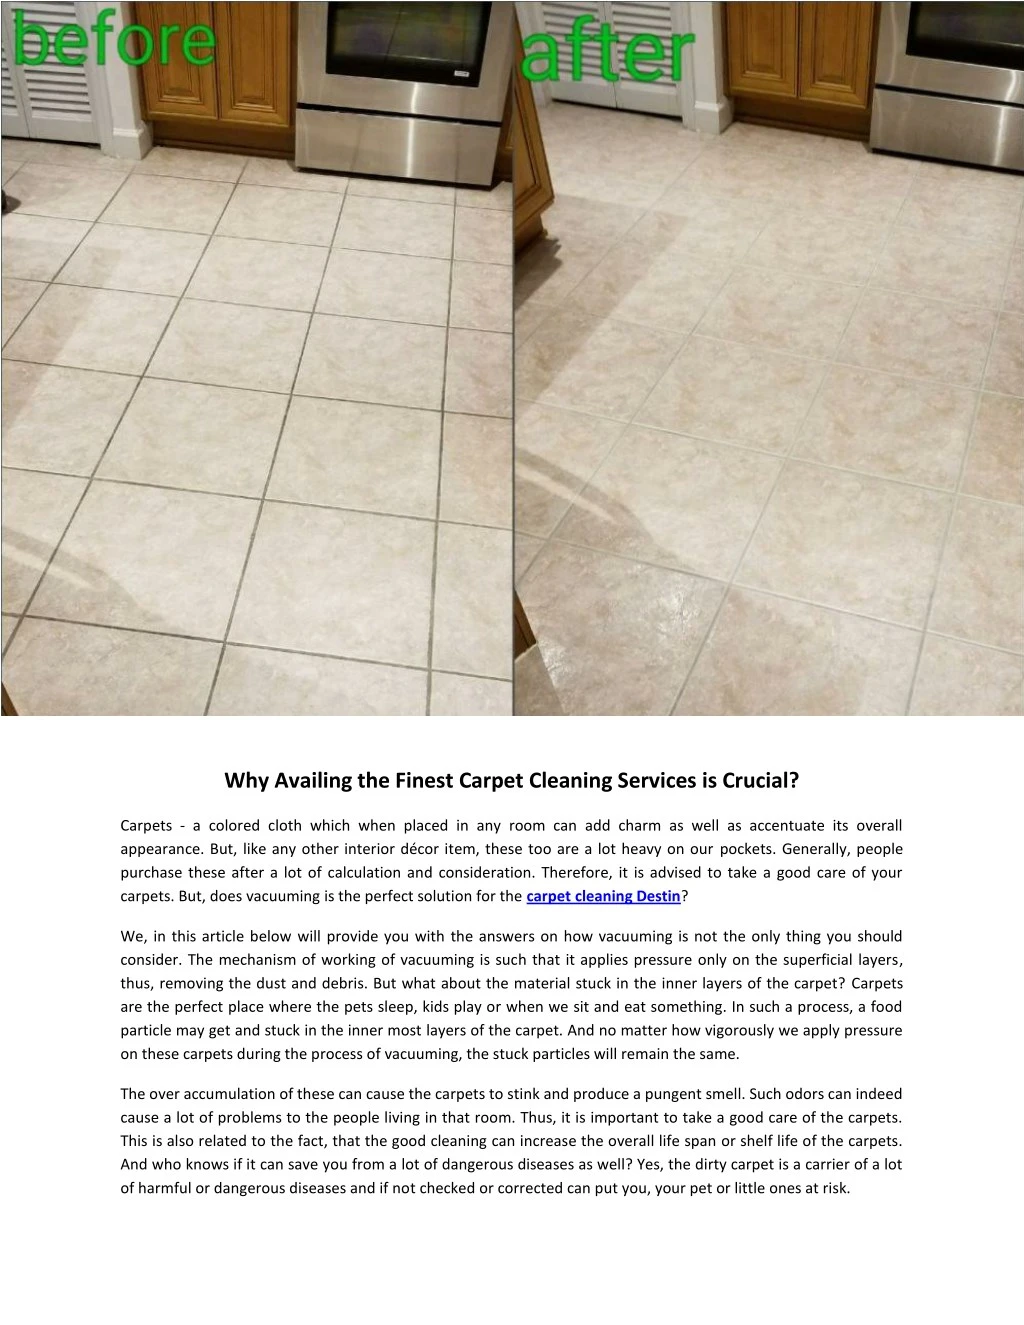 why availing the finest carpet cleaning services